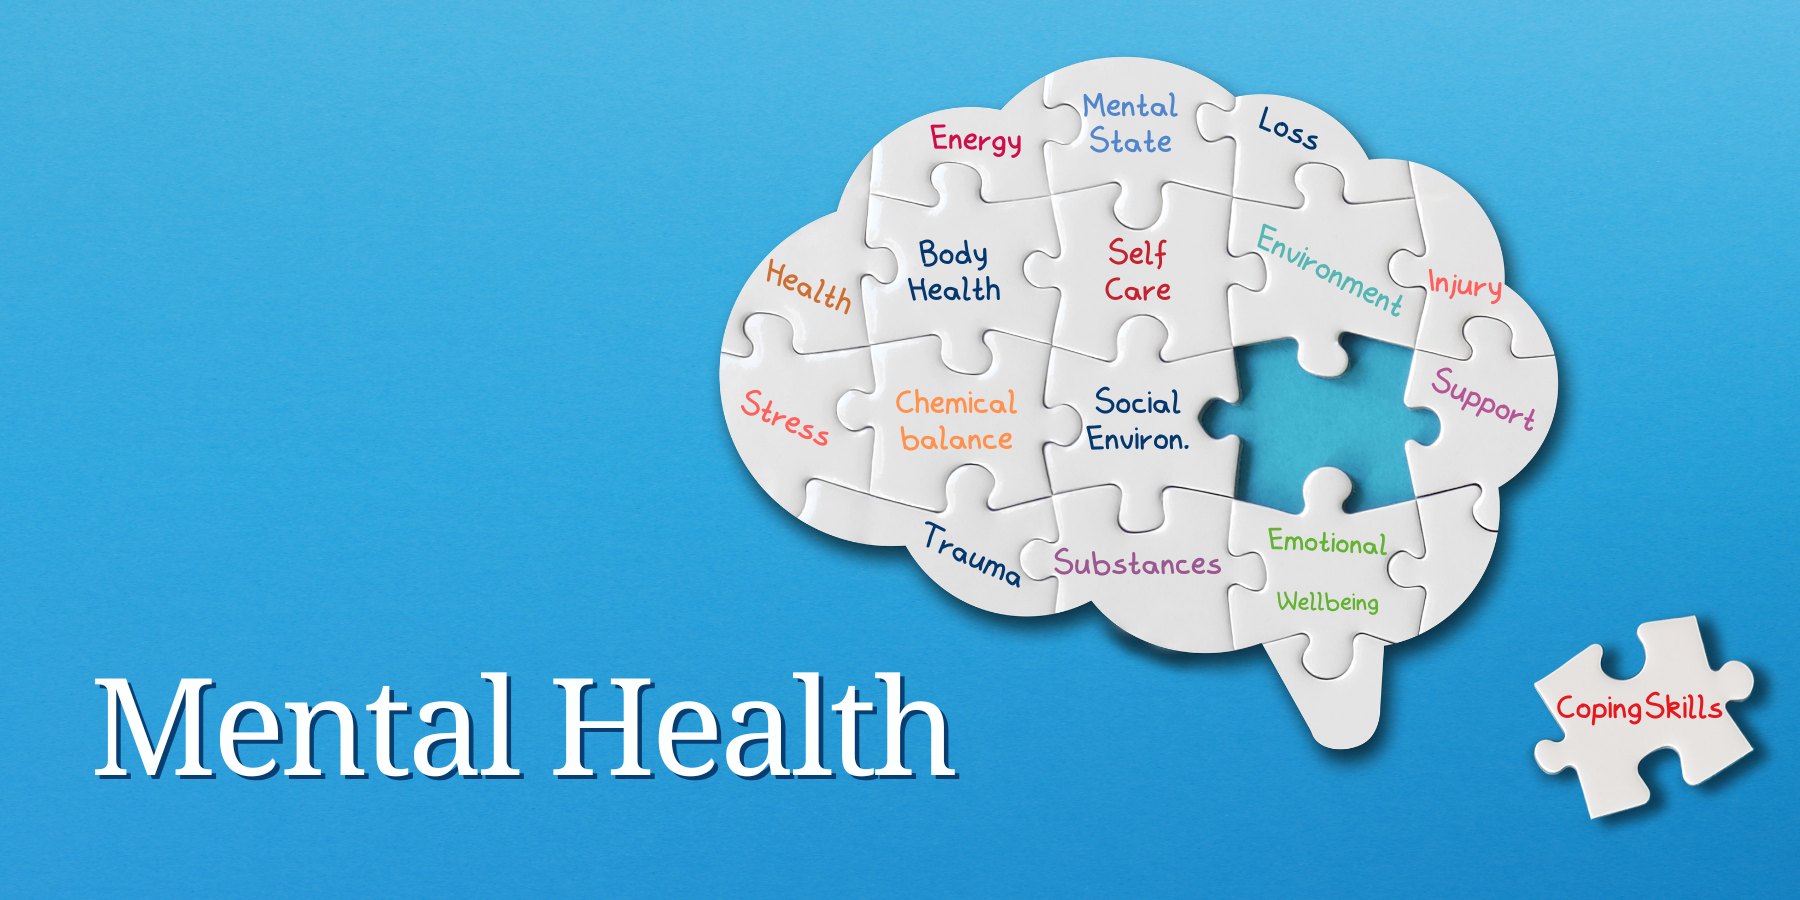 Light blue banner with the words Mental Health and a white brain. Inside the brain are words often used while discussing mental health like trauma, therapy, self-care, and more.